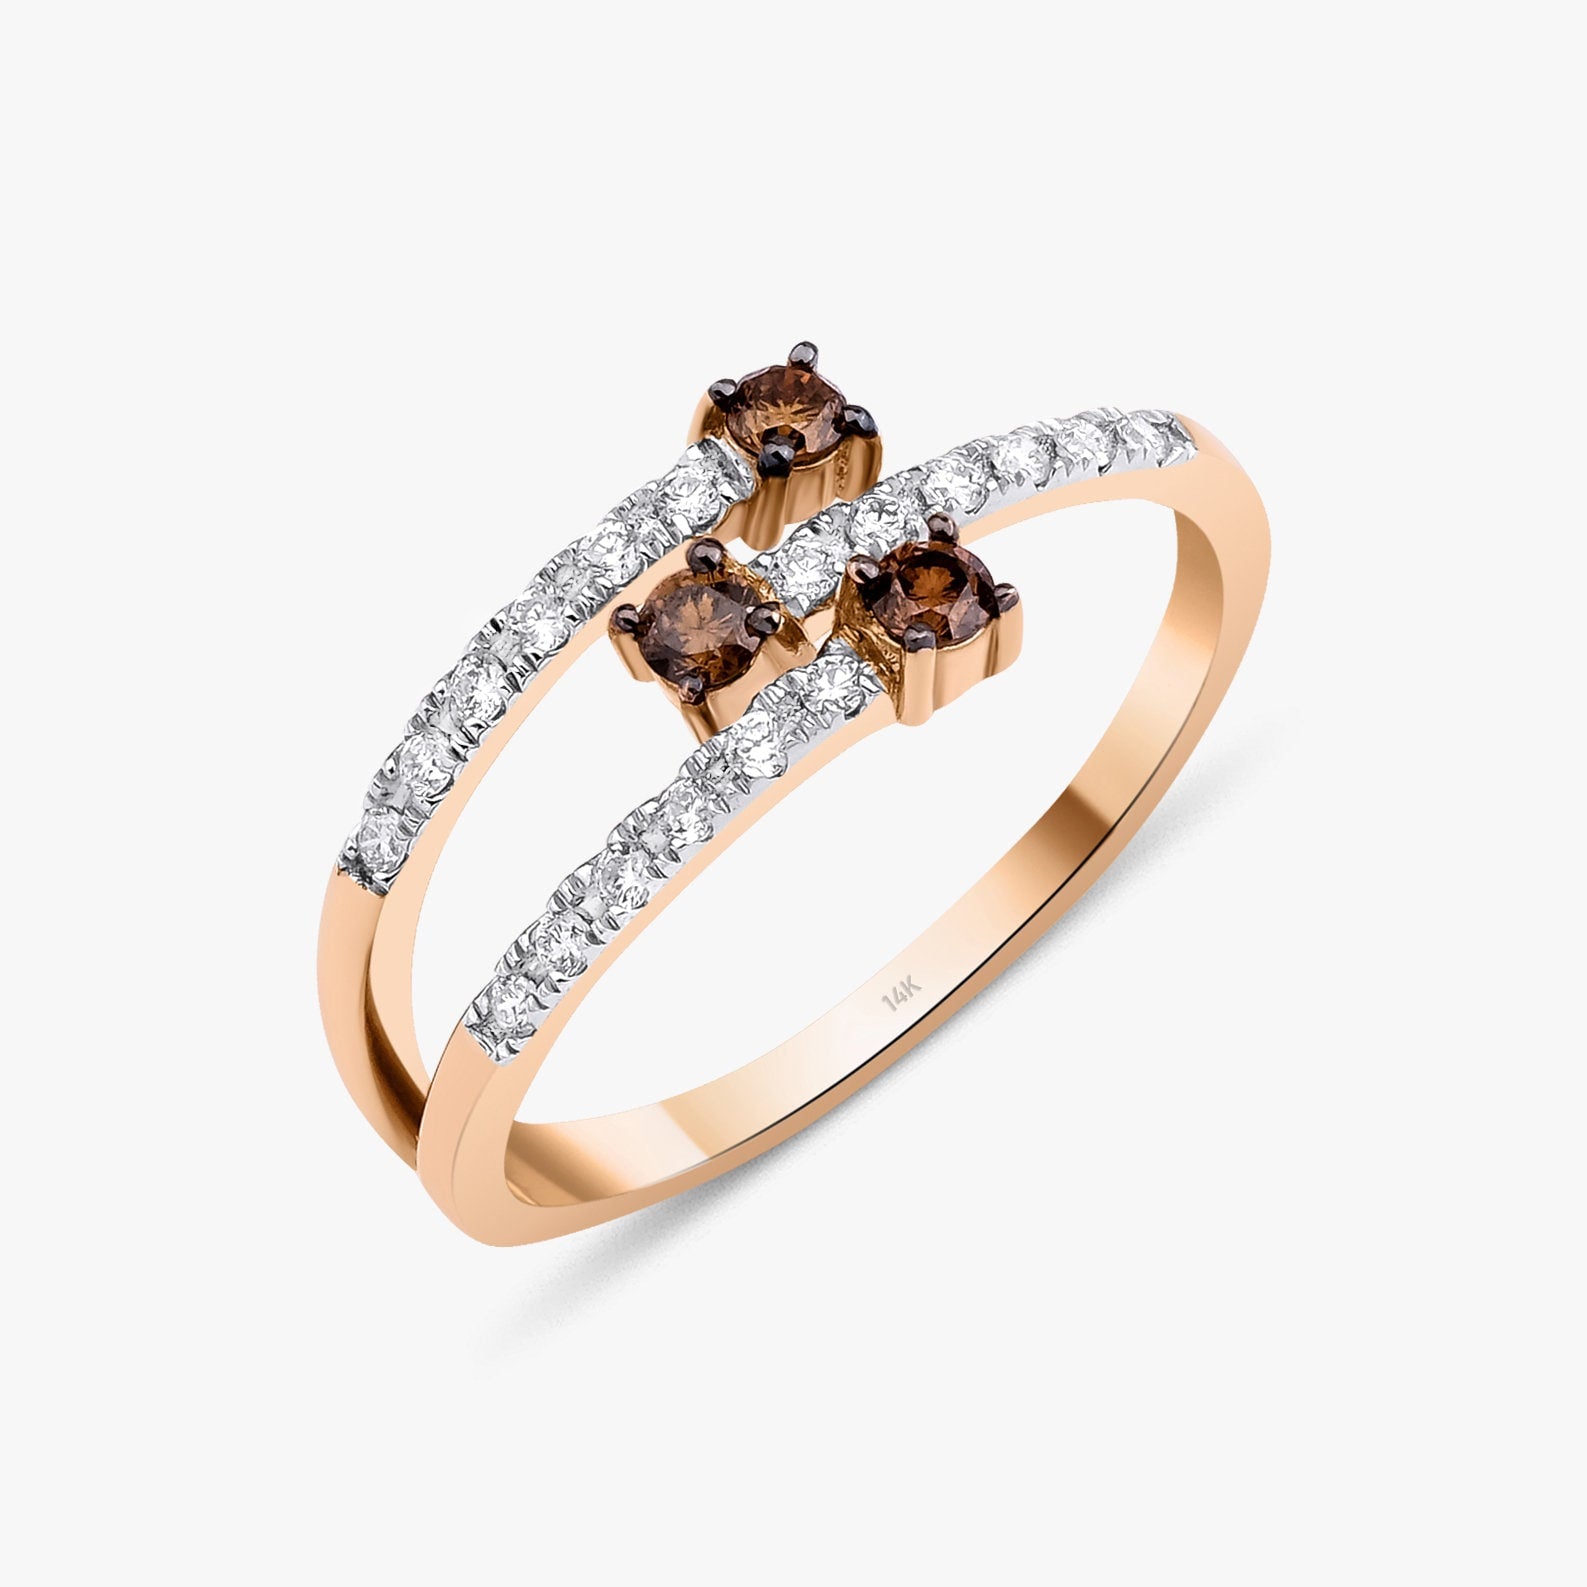 Multi Row White and Chocolate Diamond Ring in 14K Gold